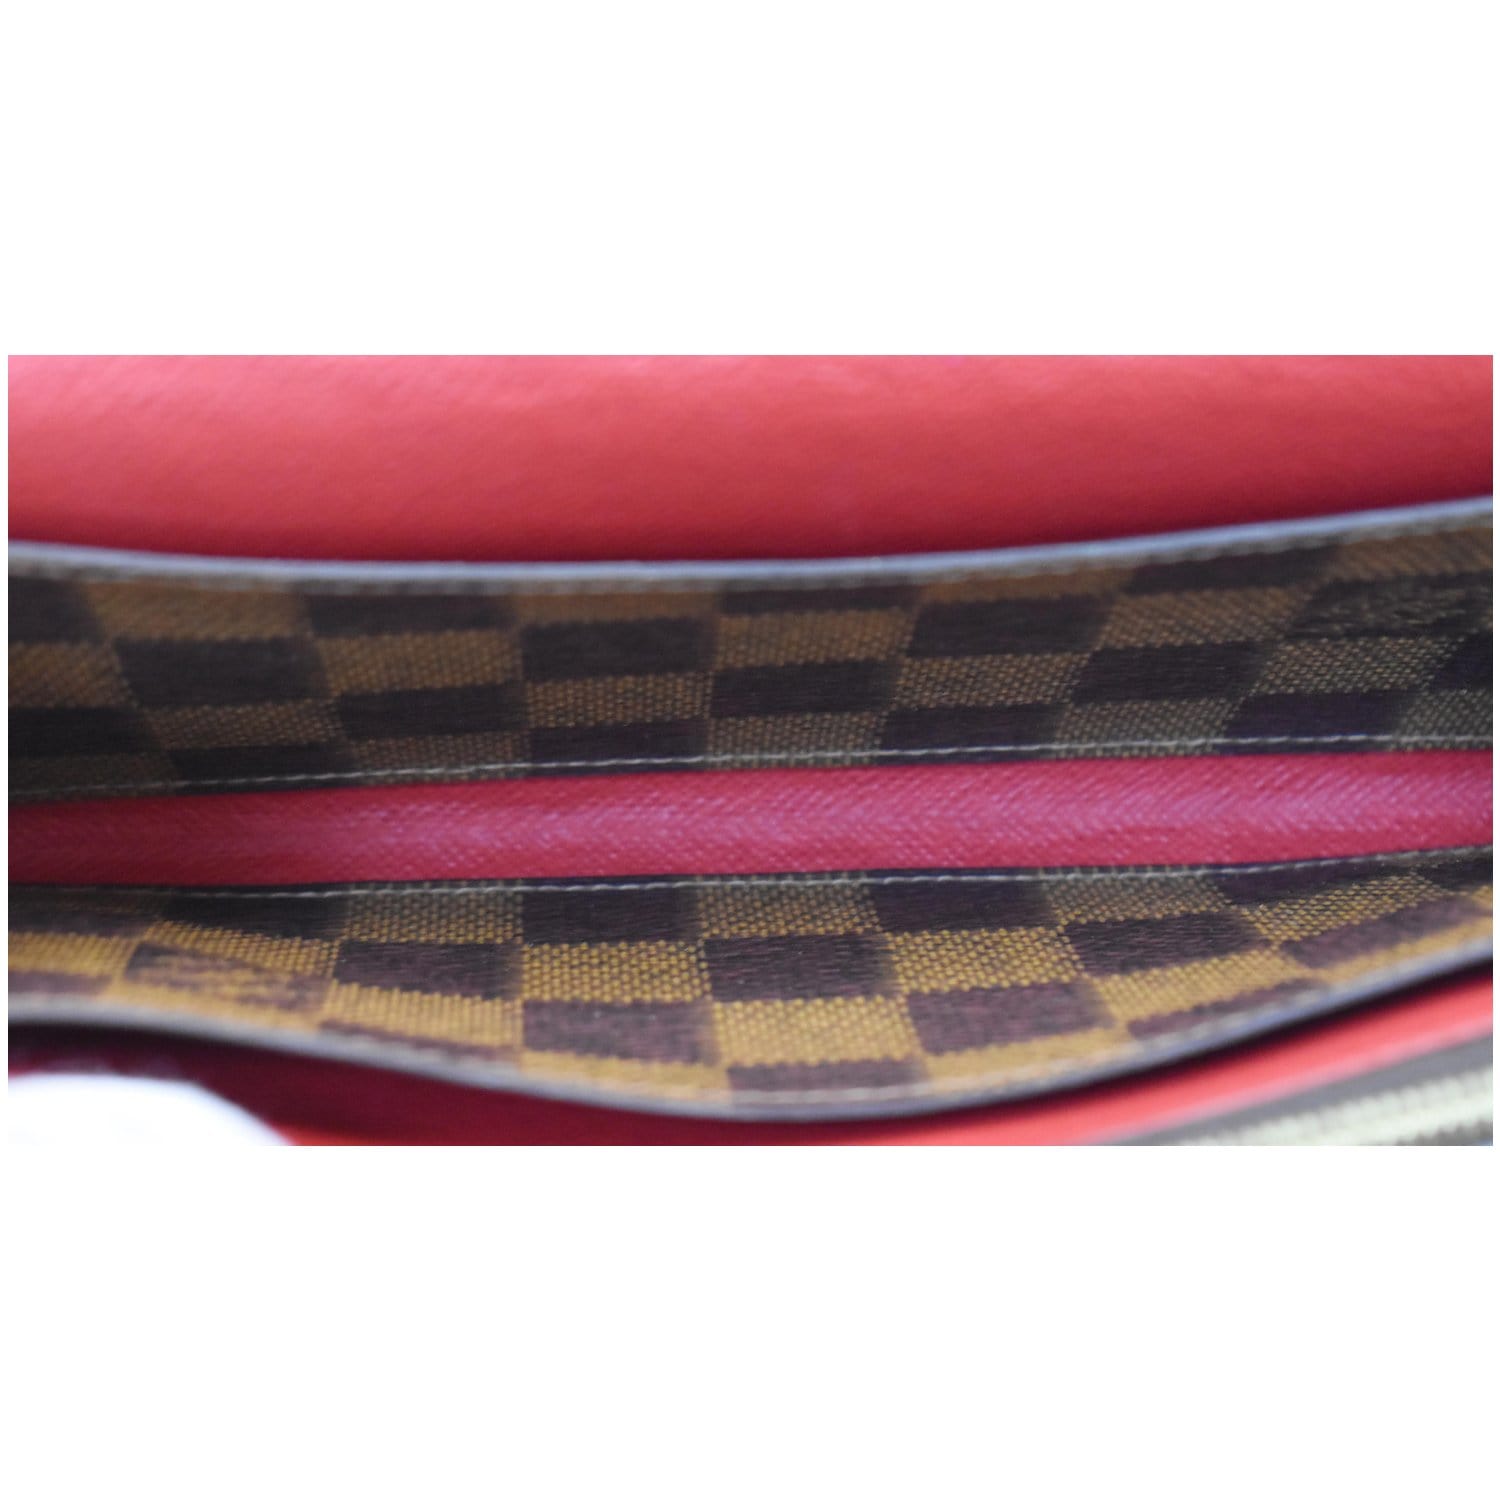 Emilie wallet Louis Vuitton Brown in Other - 34017126